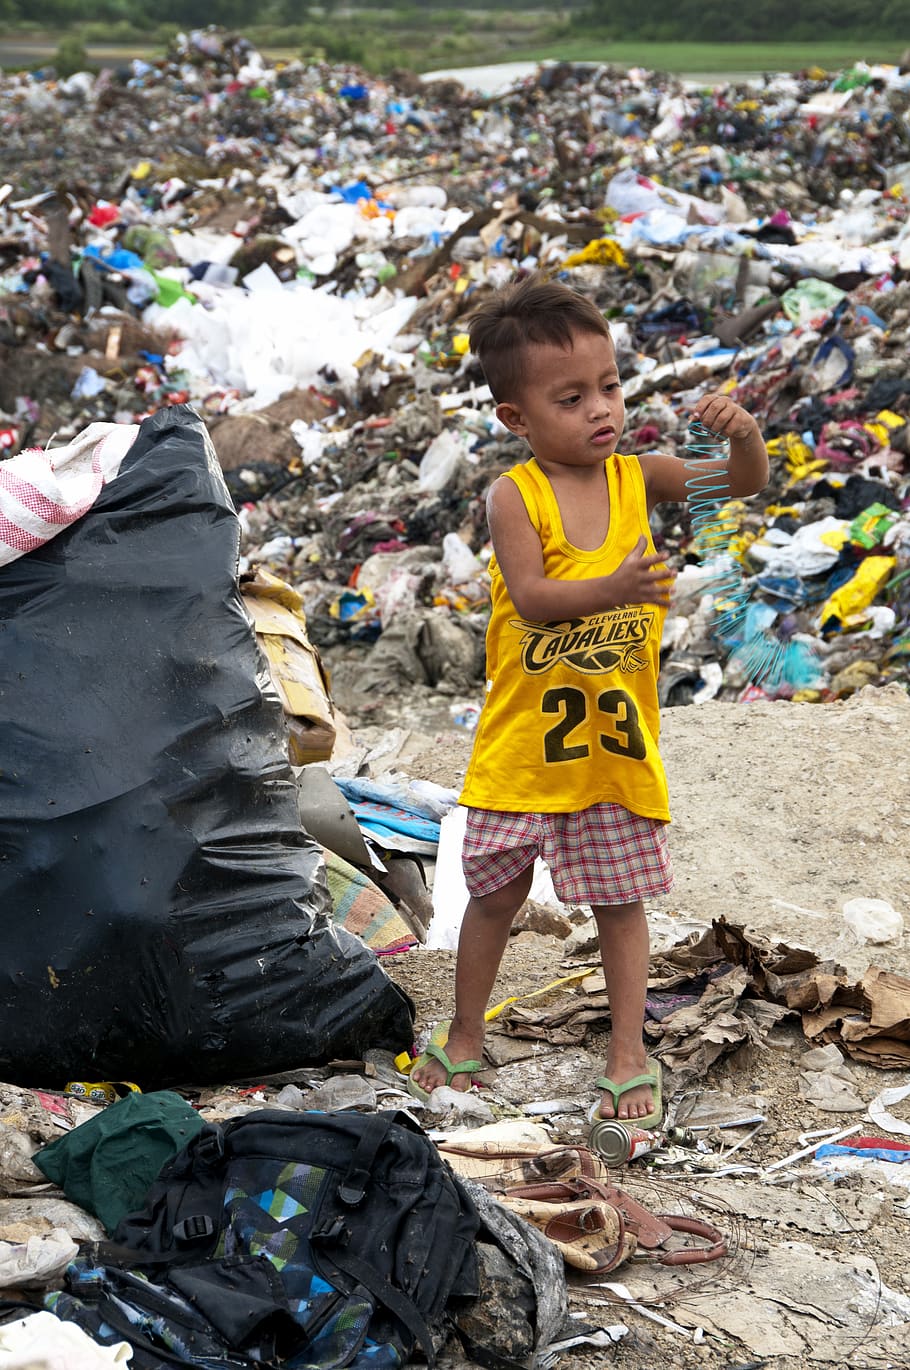 garbage, plastic, philippines, cebu, poverty, child, play, recycling, garbage collection, plastic waste